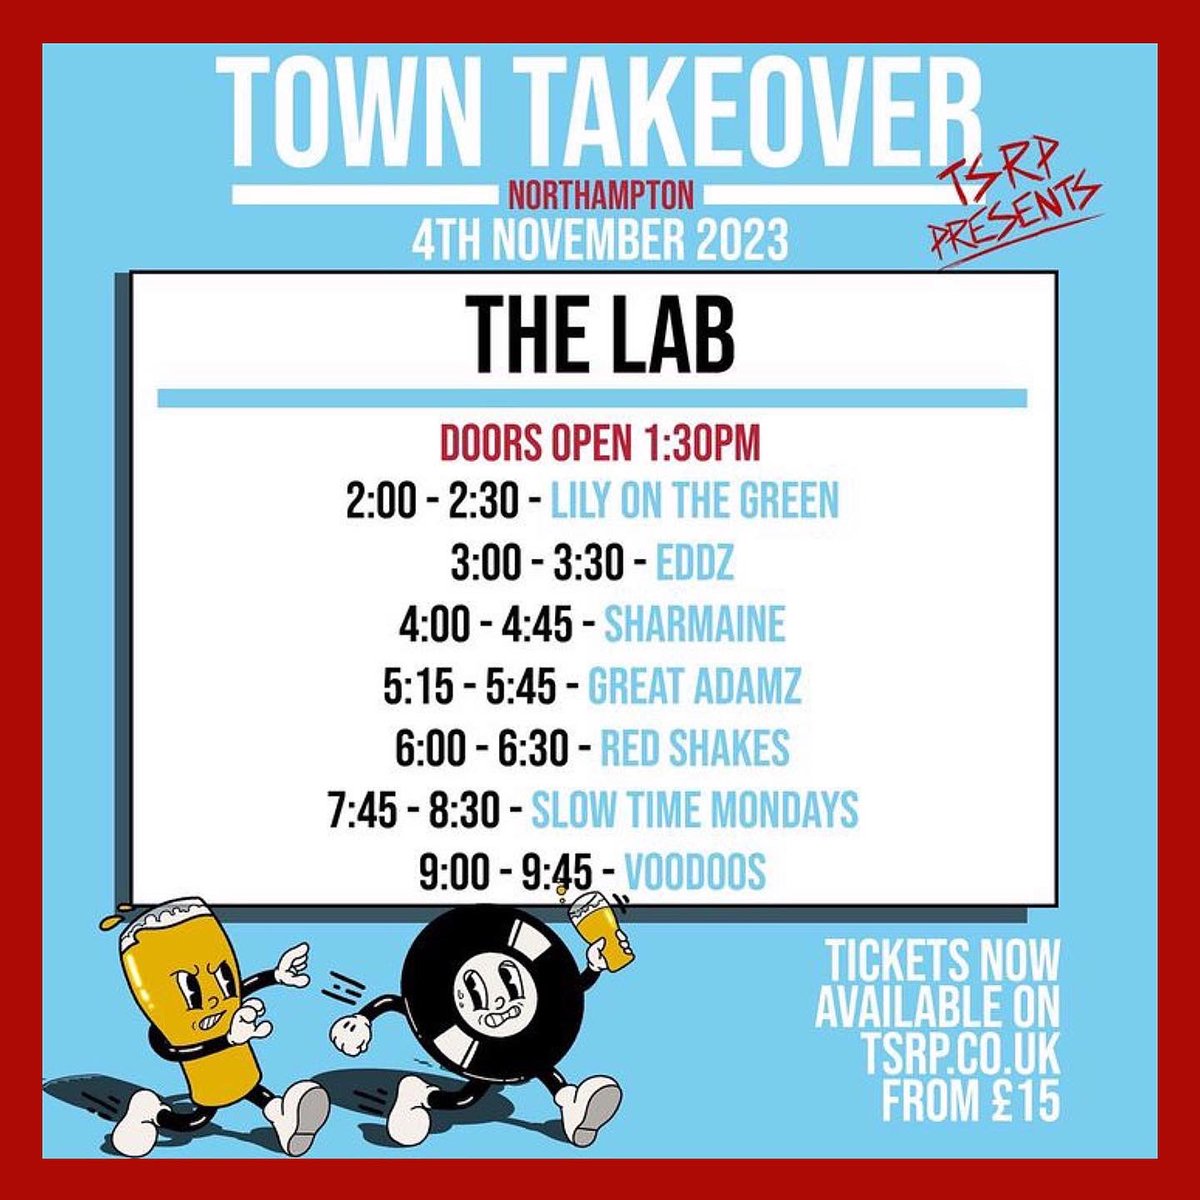 NORTHAMPTON We will see you tonight at the lab stage! ❤️👊🏼